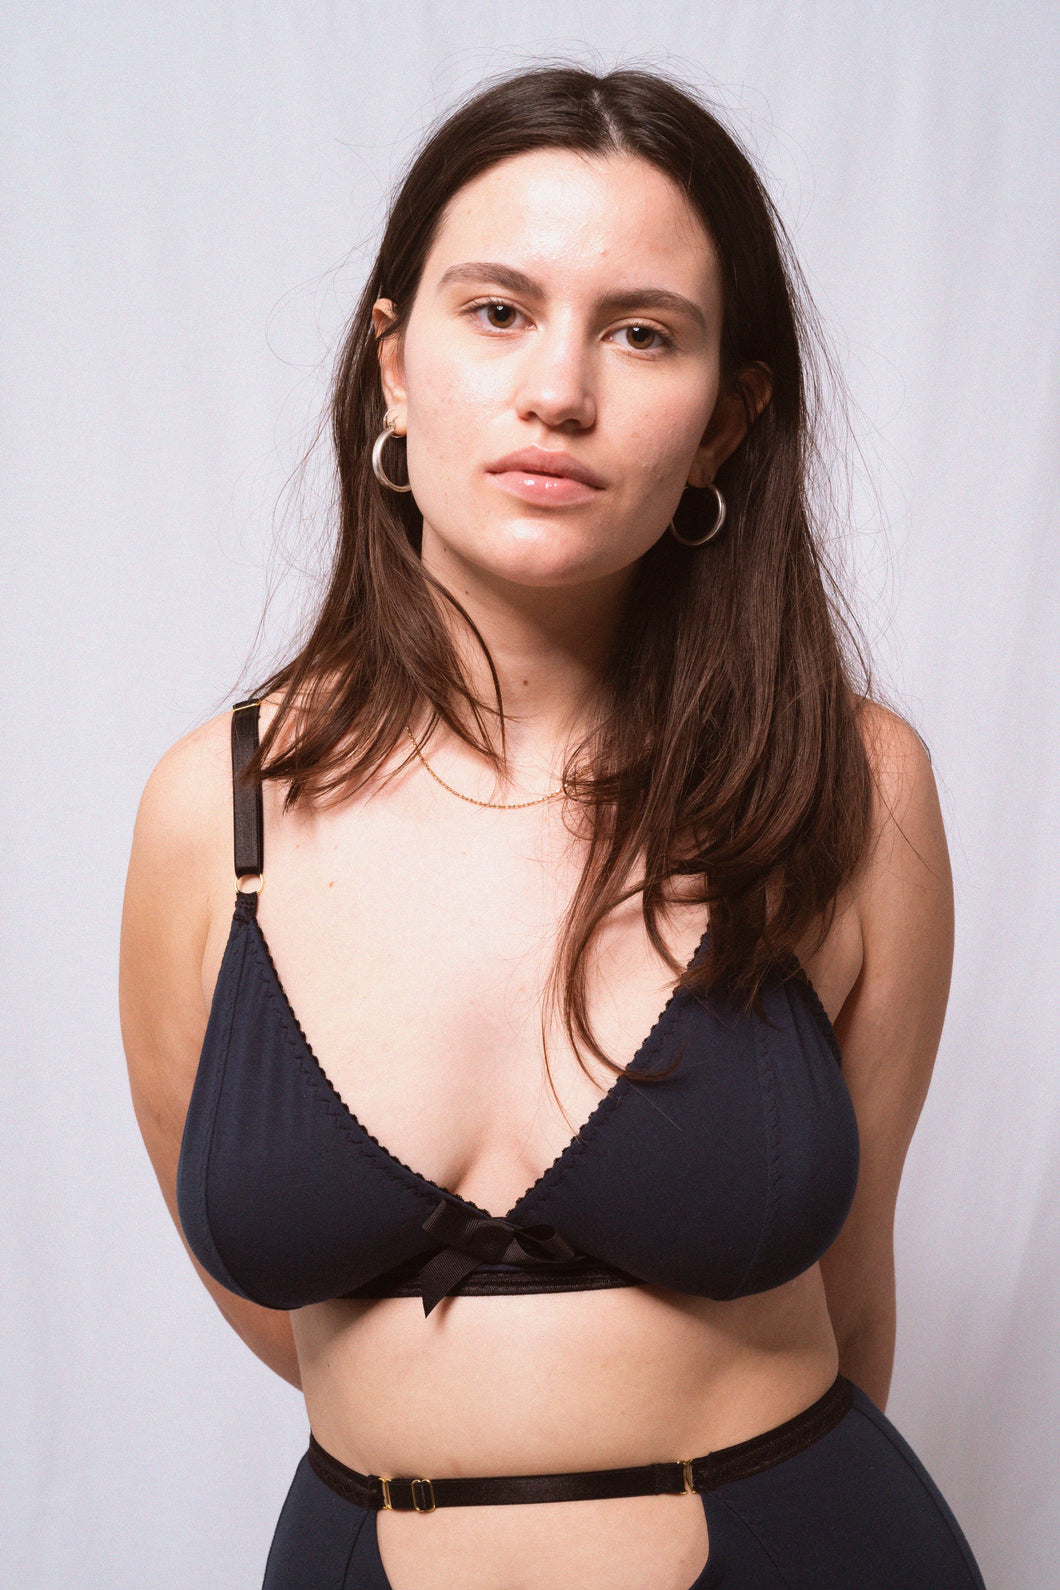 A close up showing a woman from the waist up looking into the camera. She has long brown hair, gold hooped earrings and wears the Artemis triangle shaped bralette in petrol blue bamboo jersey. The jersey is trimmed with black elastics and a black bow at the front.